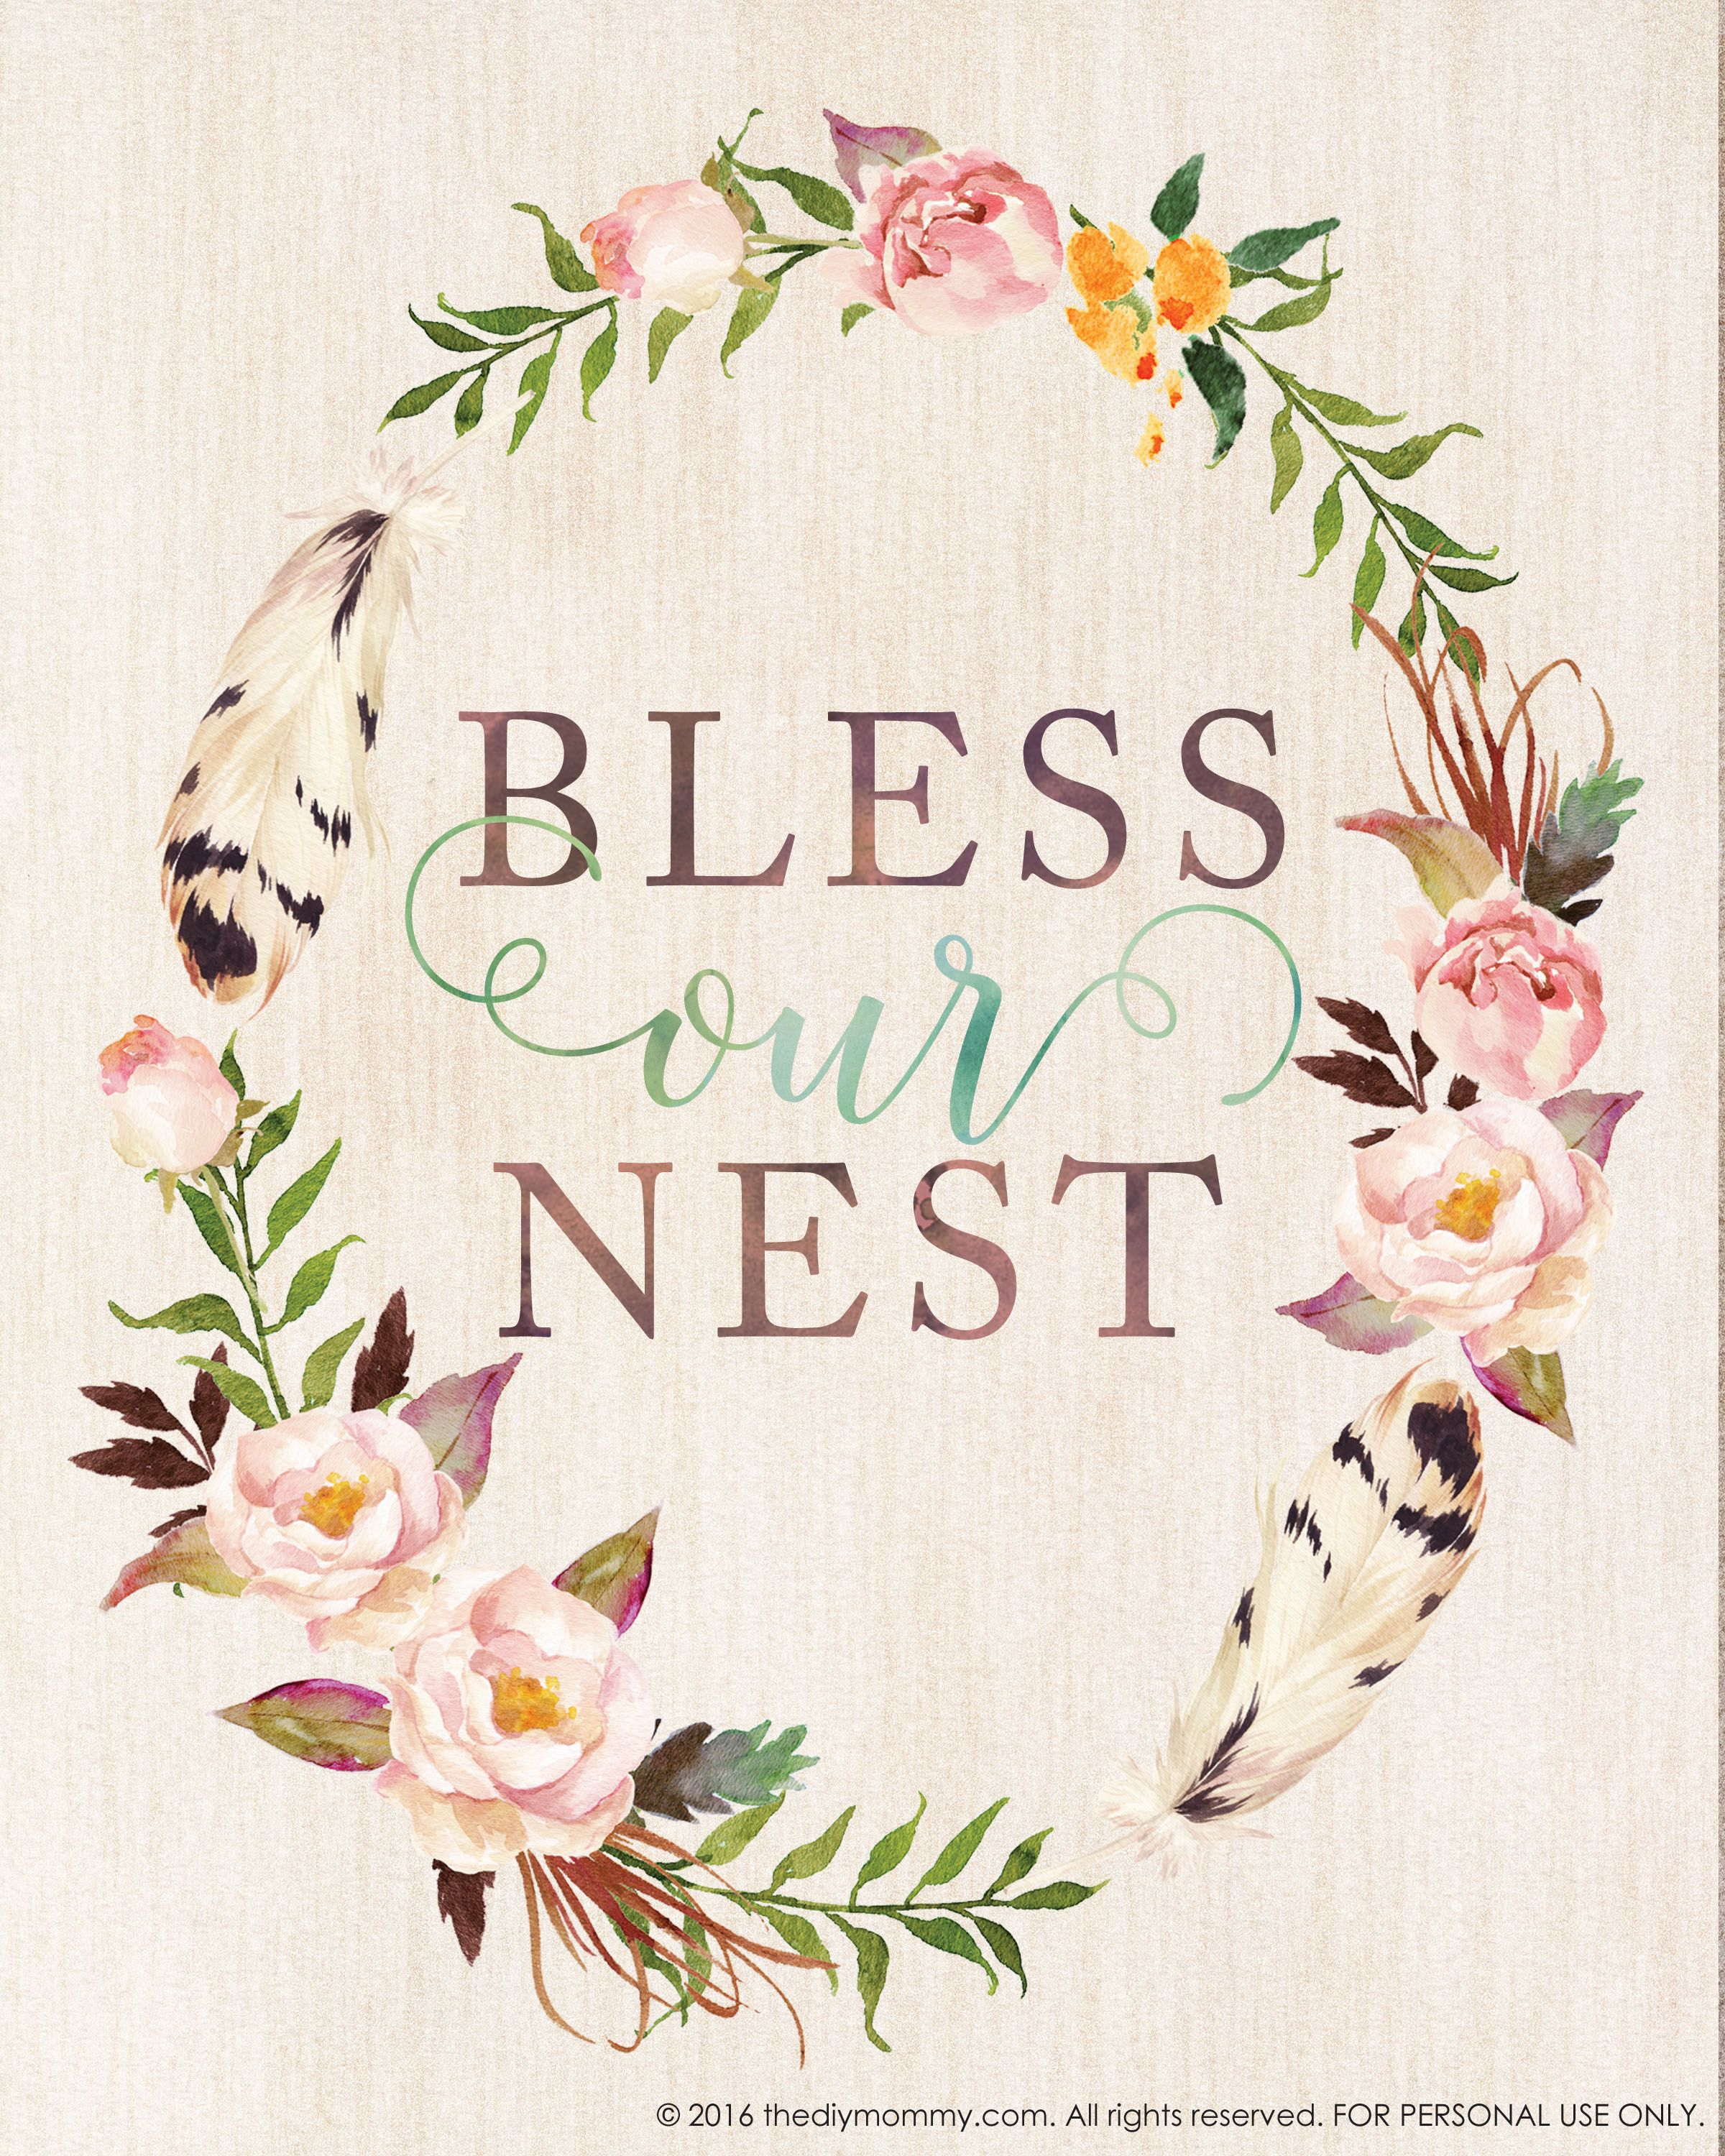 Bless Our Nest - Free Printable Watercolor Artwork For Spring - Free Printable Artwork